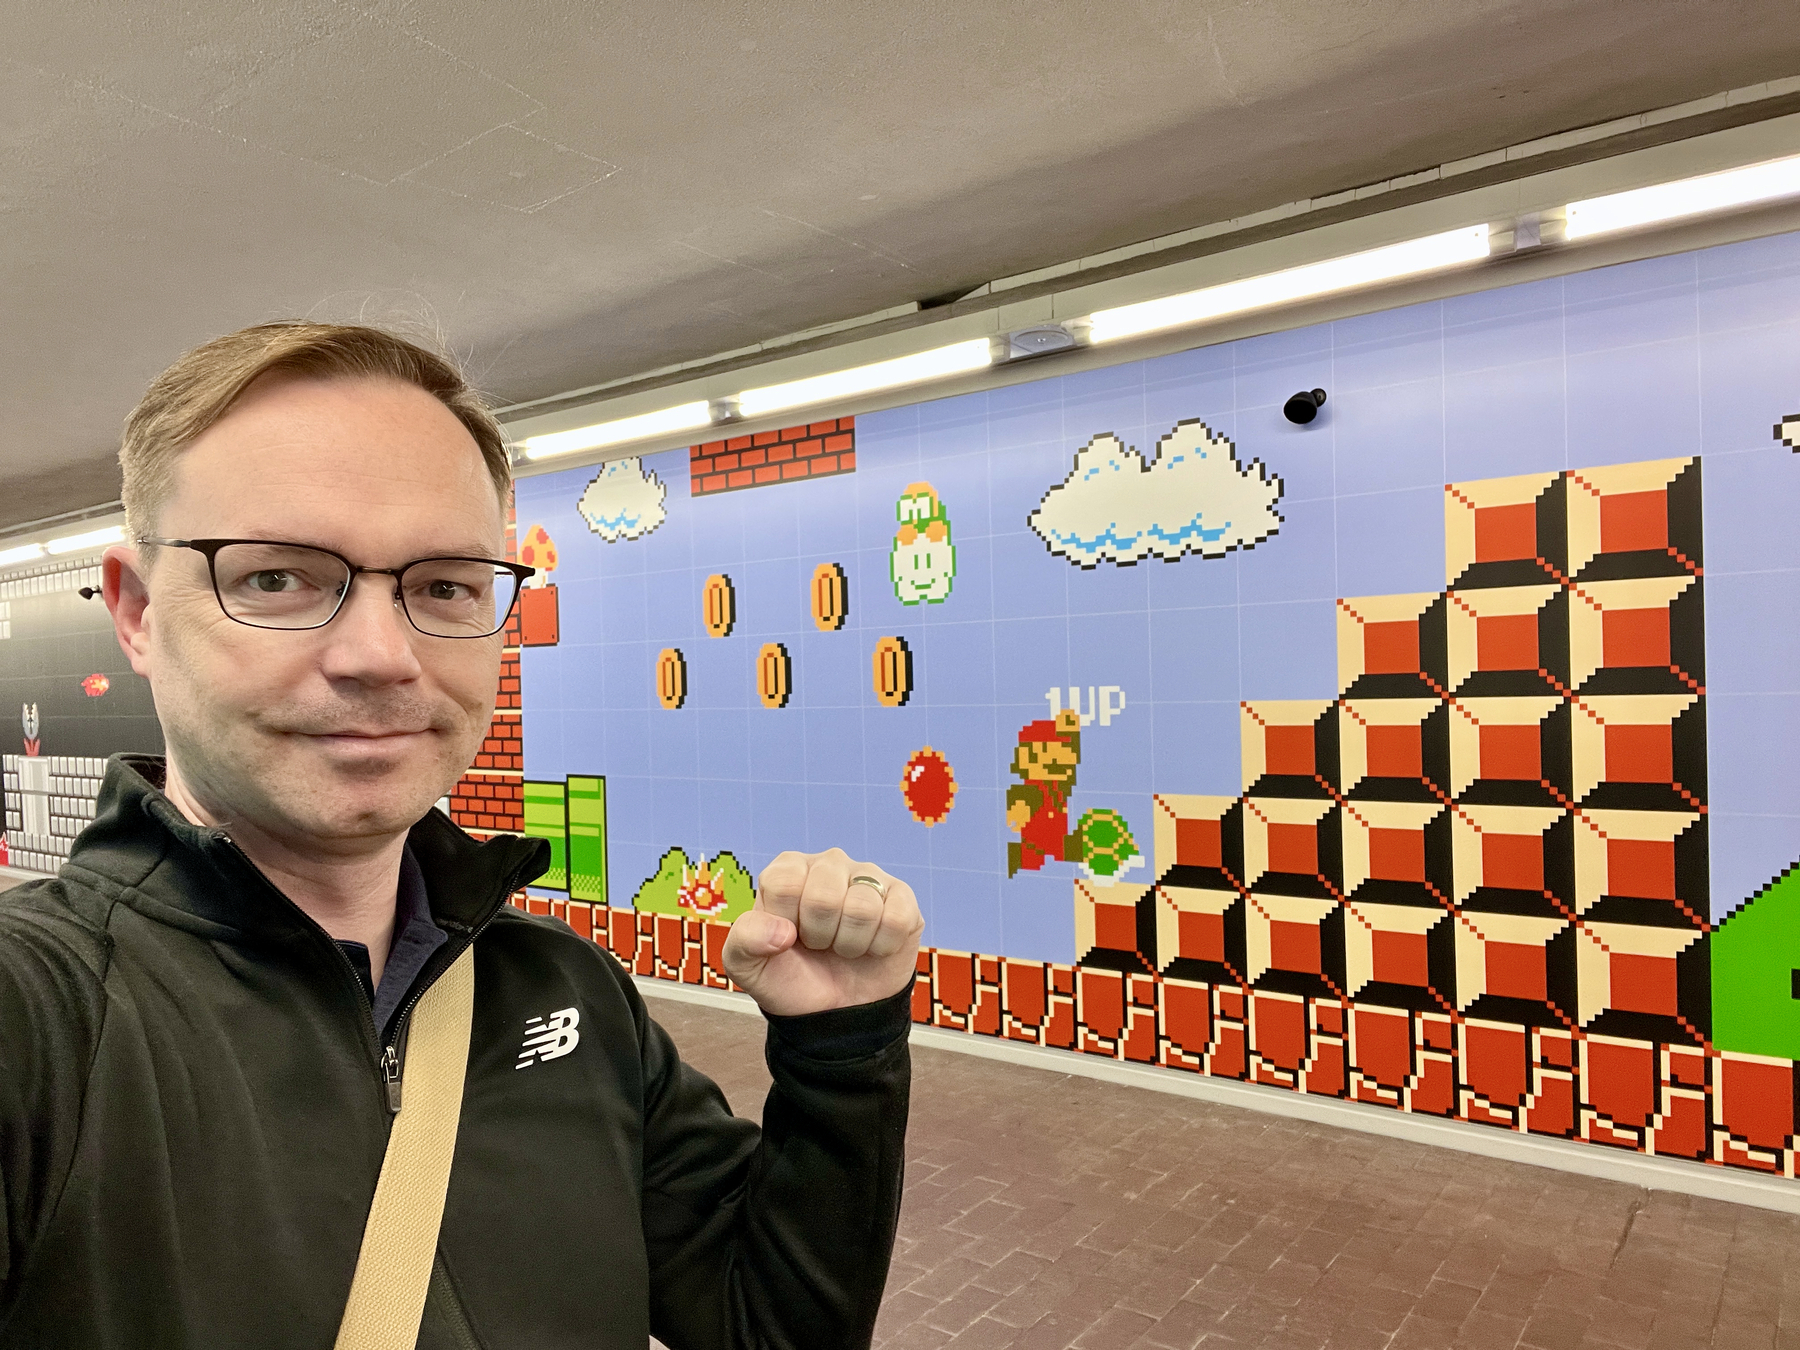 Chad selfie in front of a wall with Super Mario jumping up steps